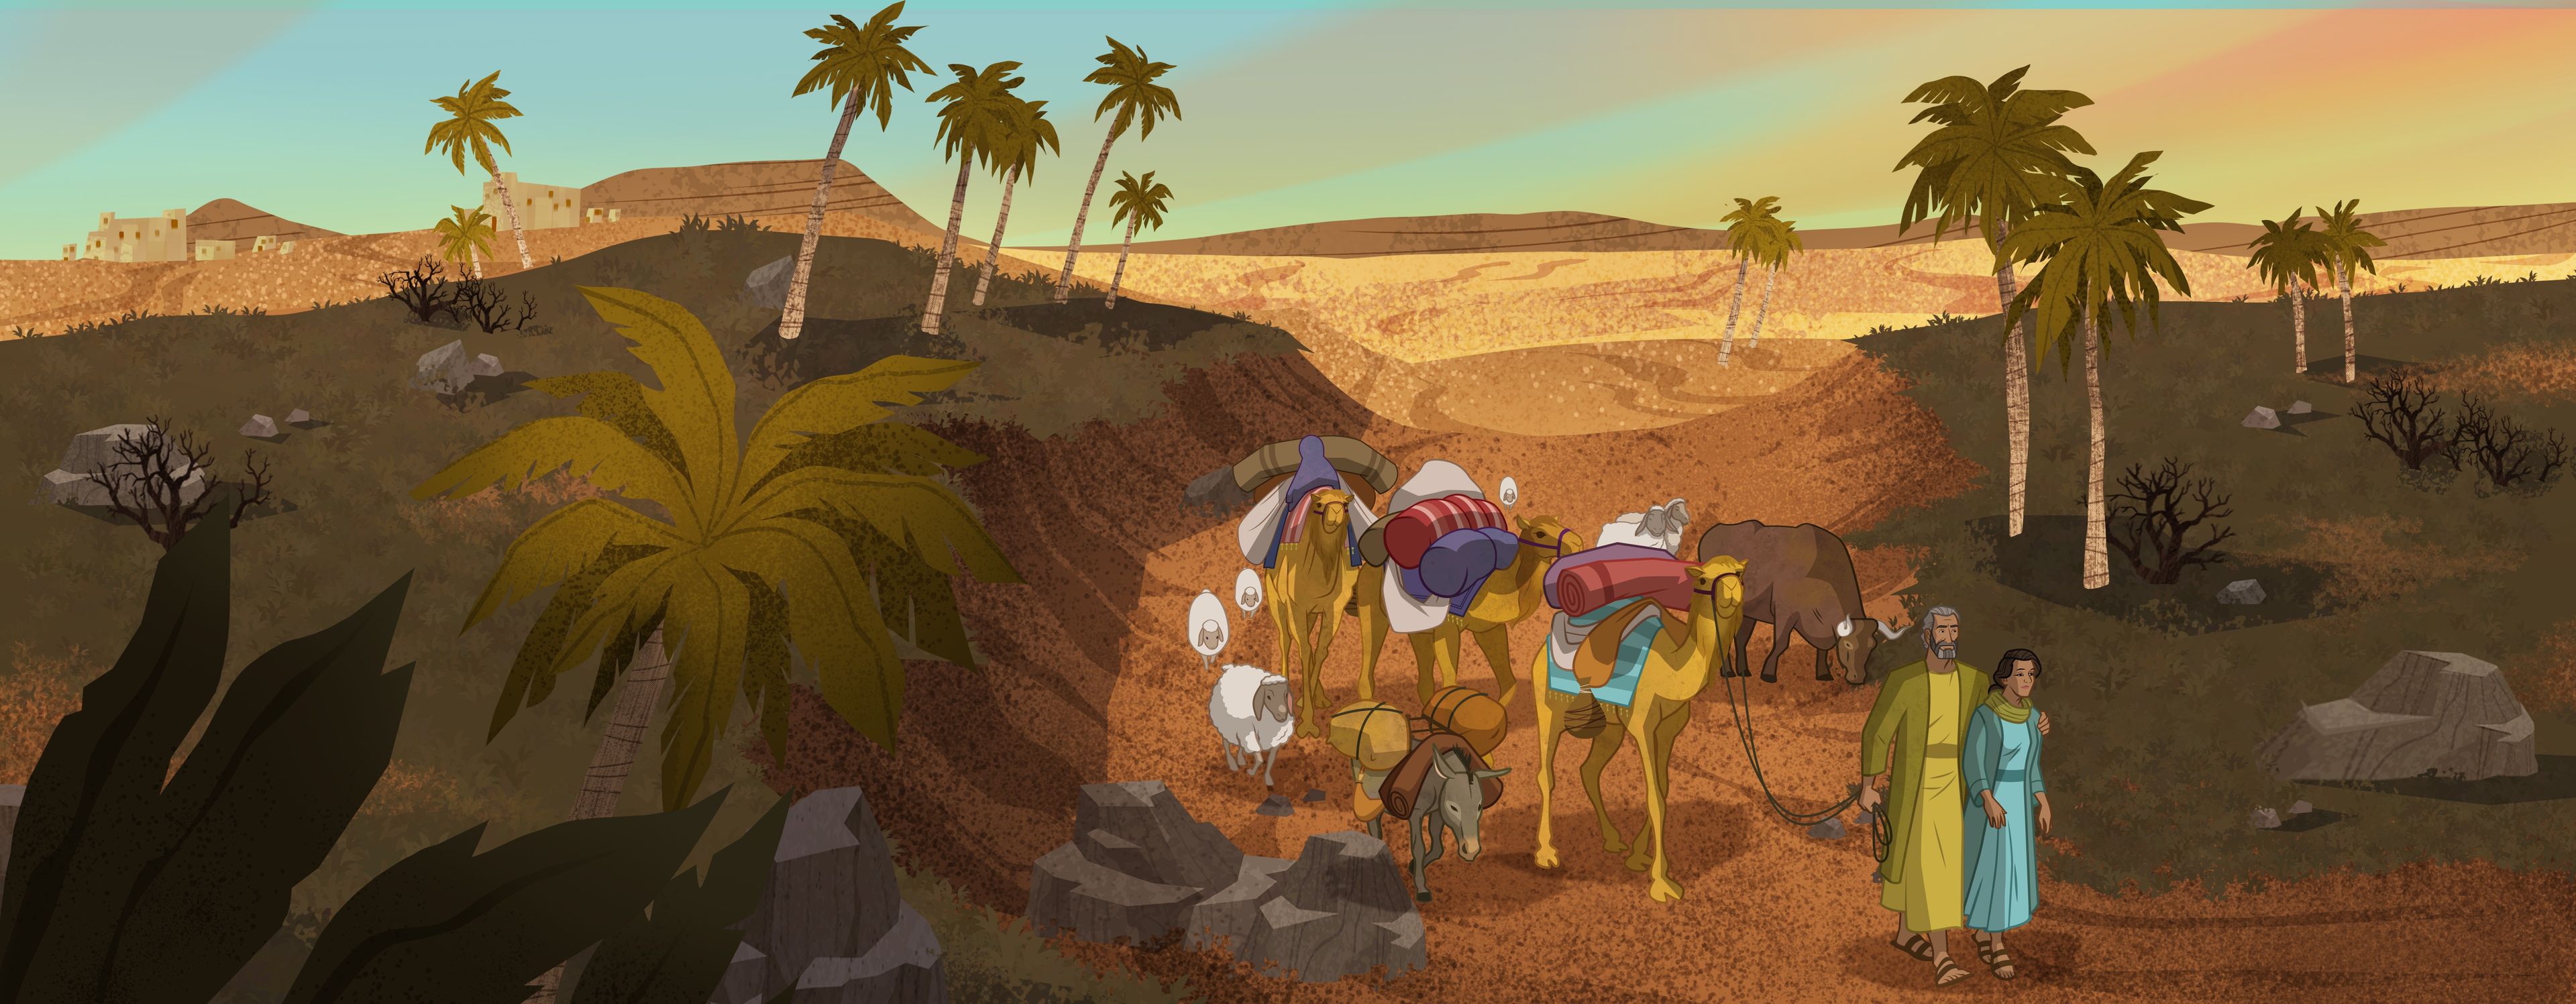 Illustration of Abraham and Sarah travel with camels. Genesis 12:10–20; Abraham 2:21–25